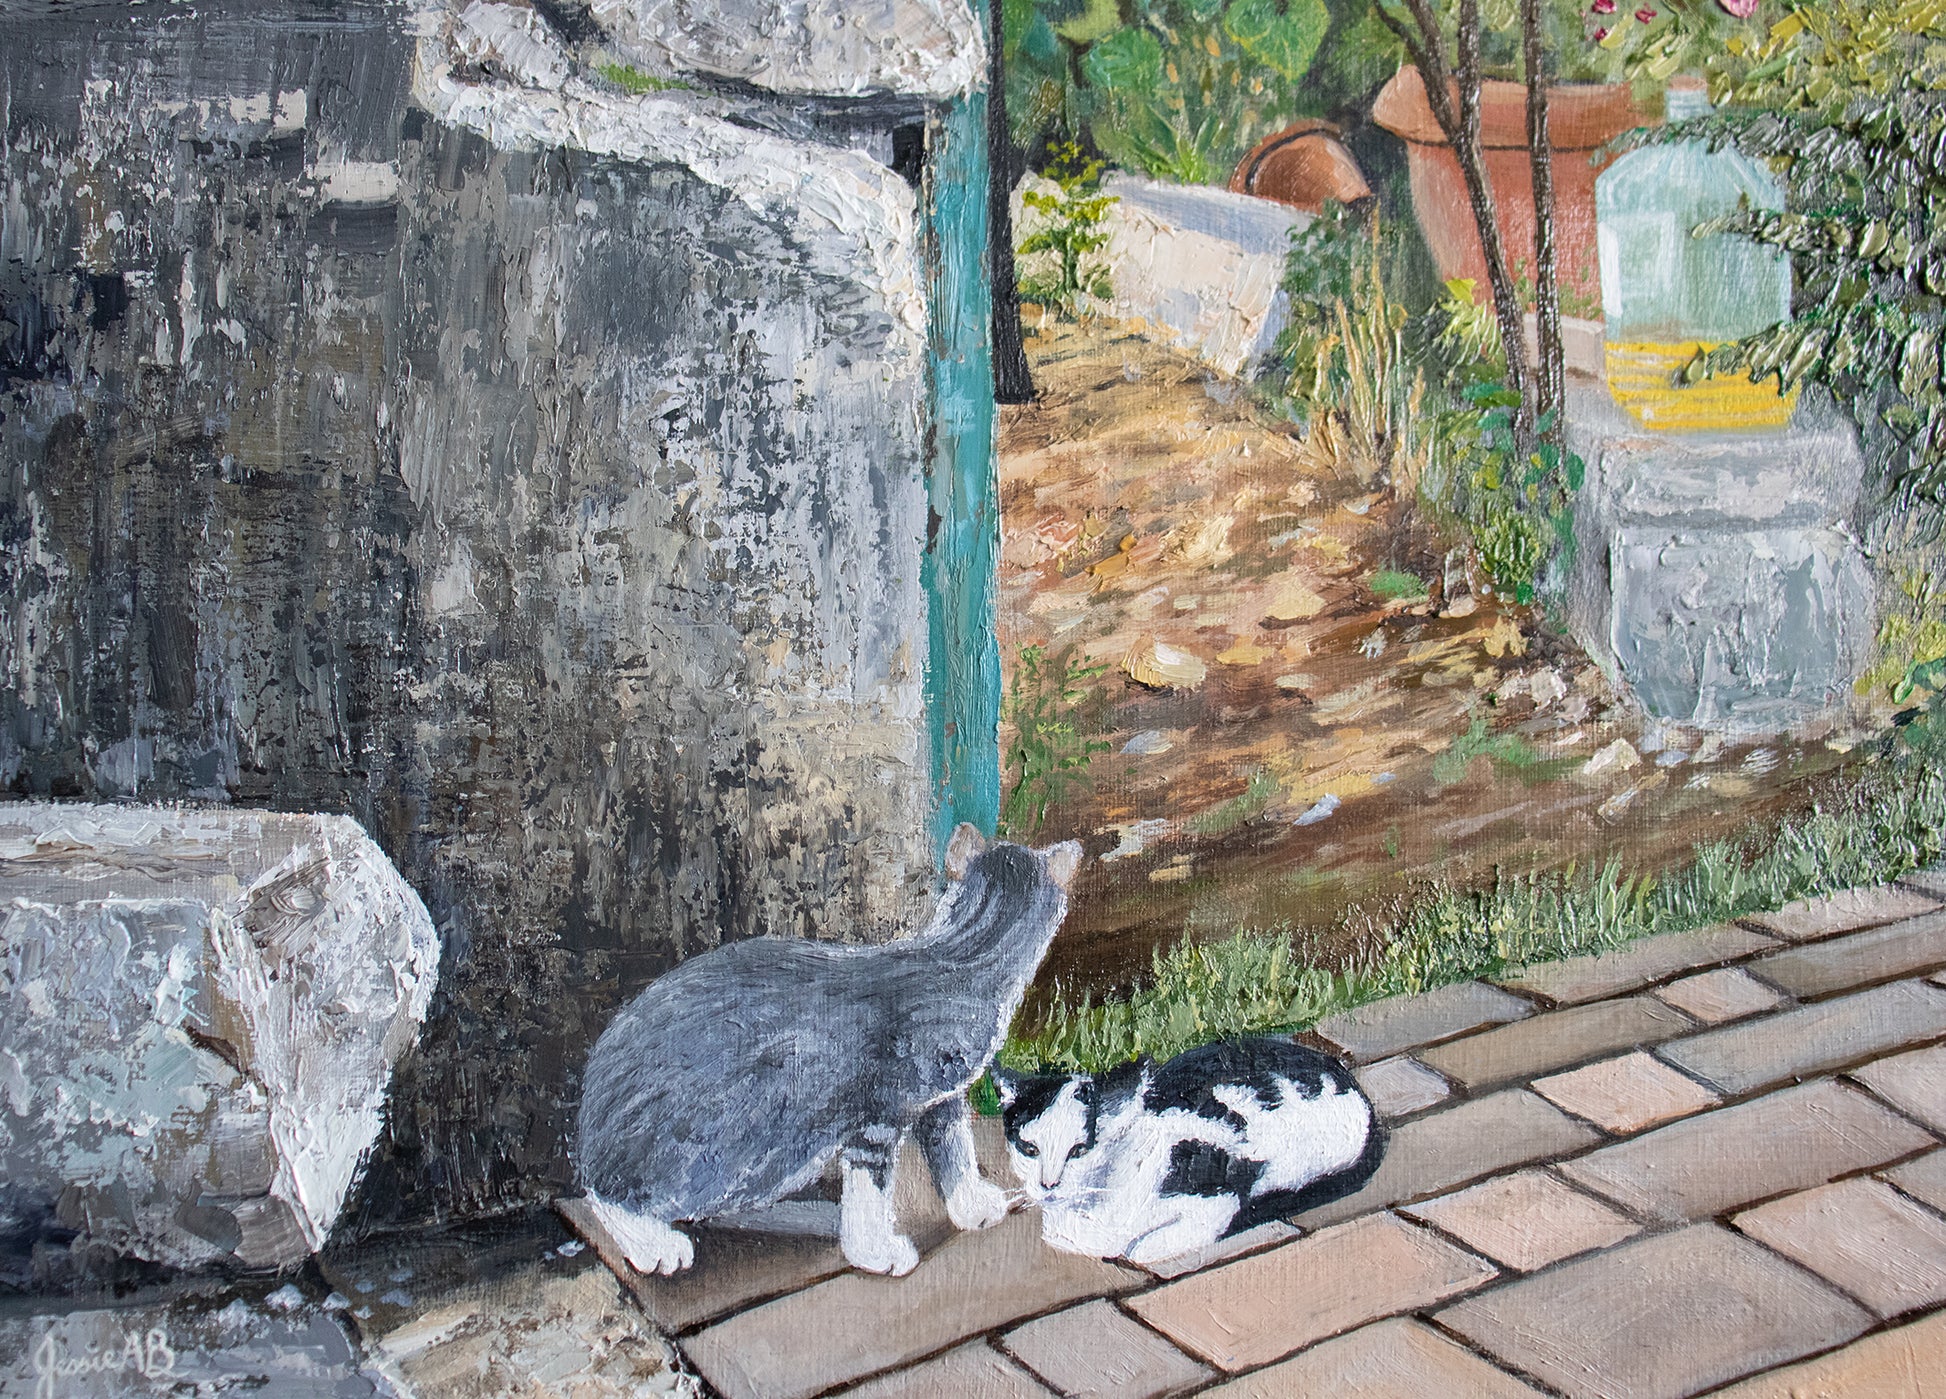 Nature's Voice by Jessie Bettersworth close up detail photo of two playful cats